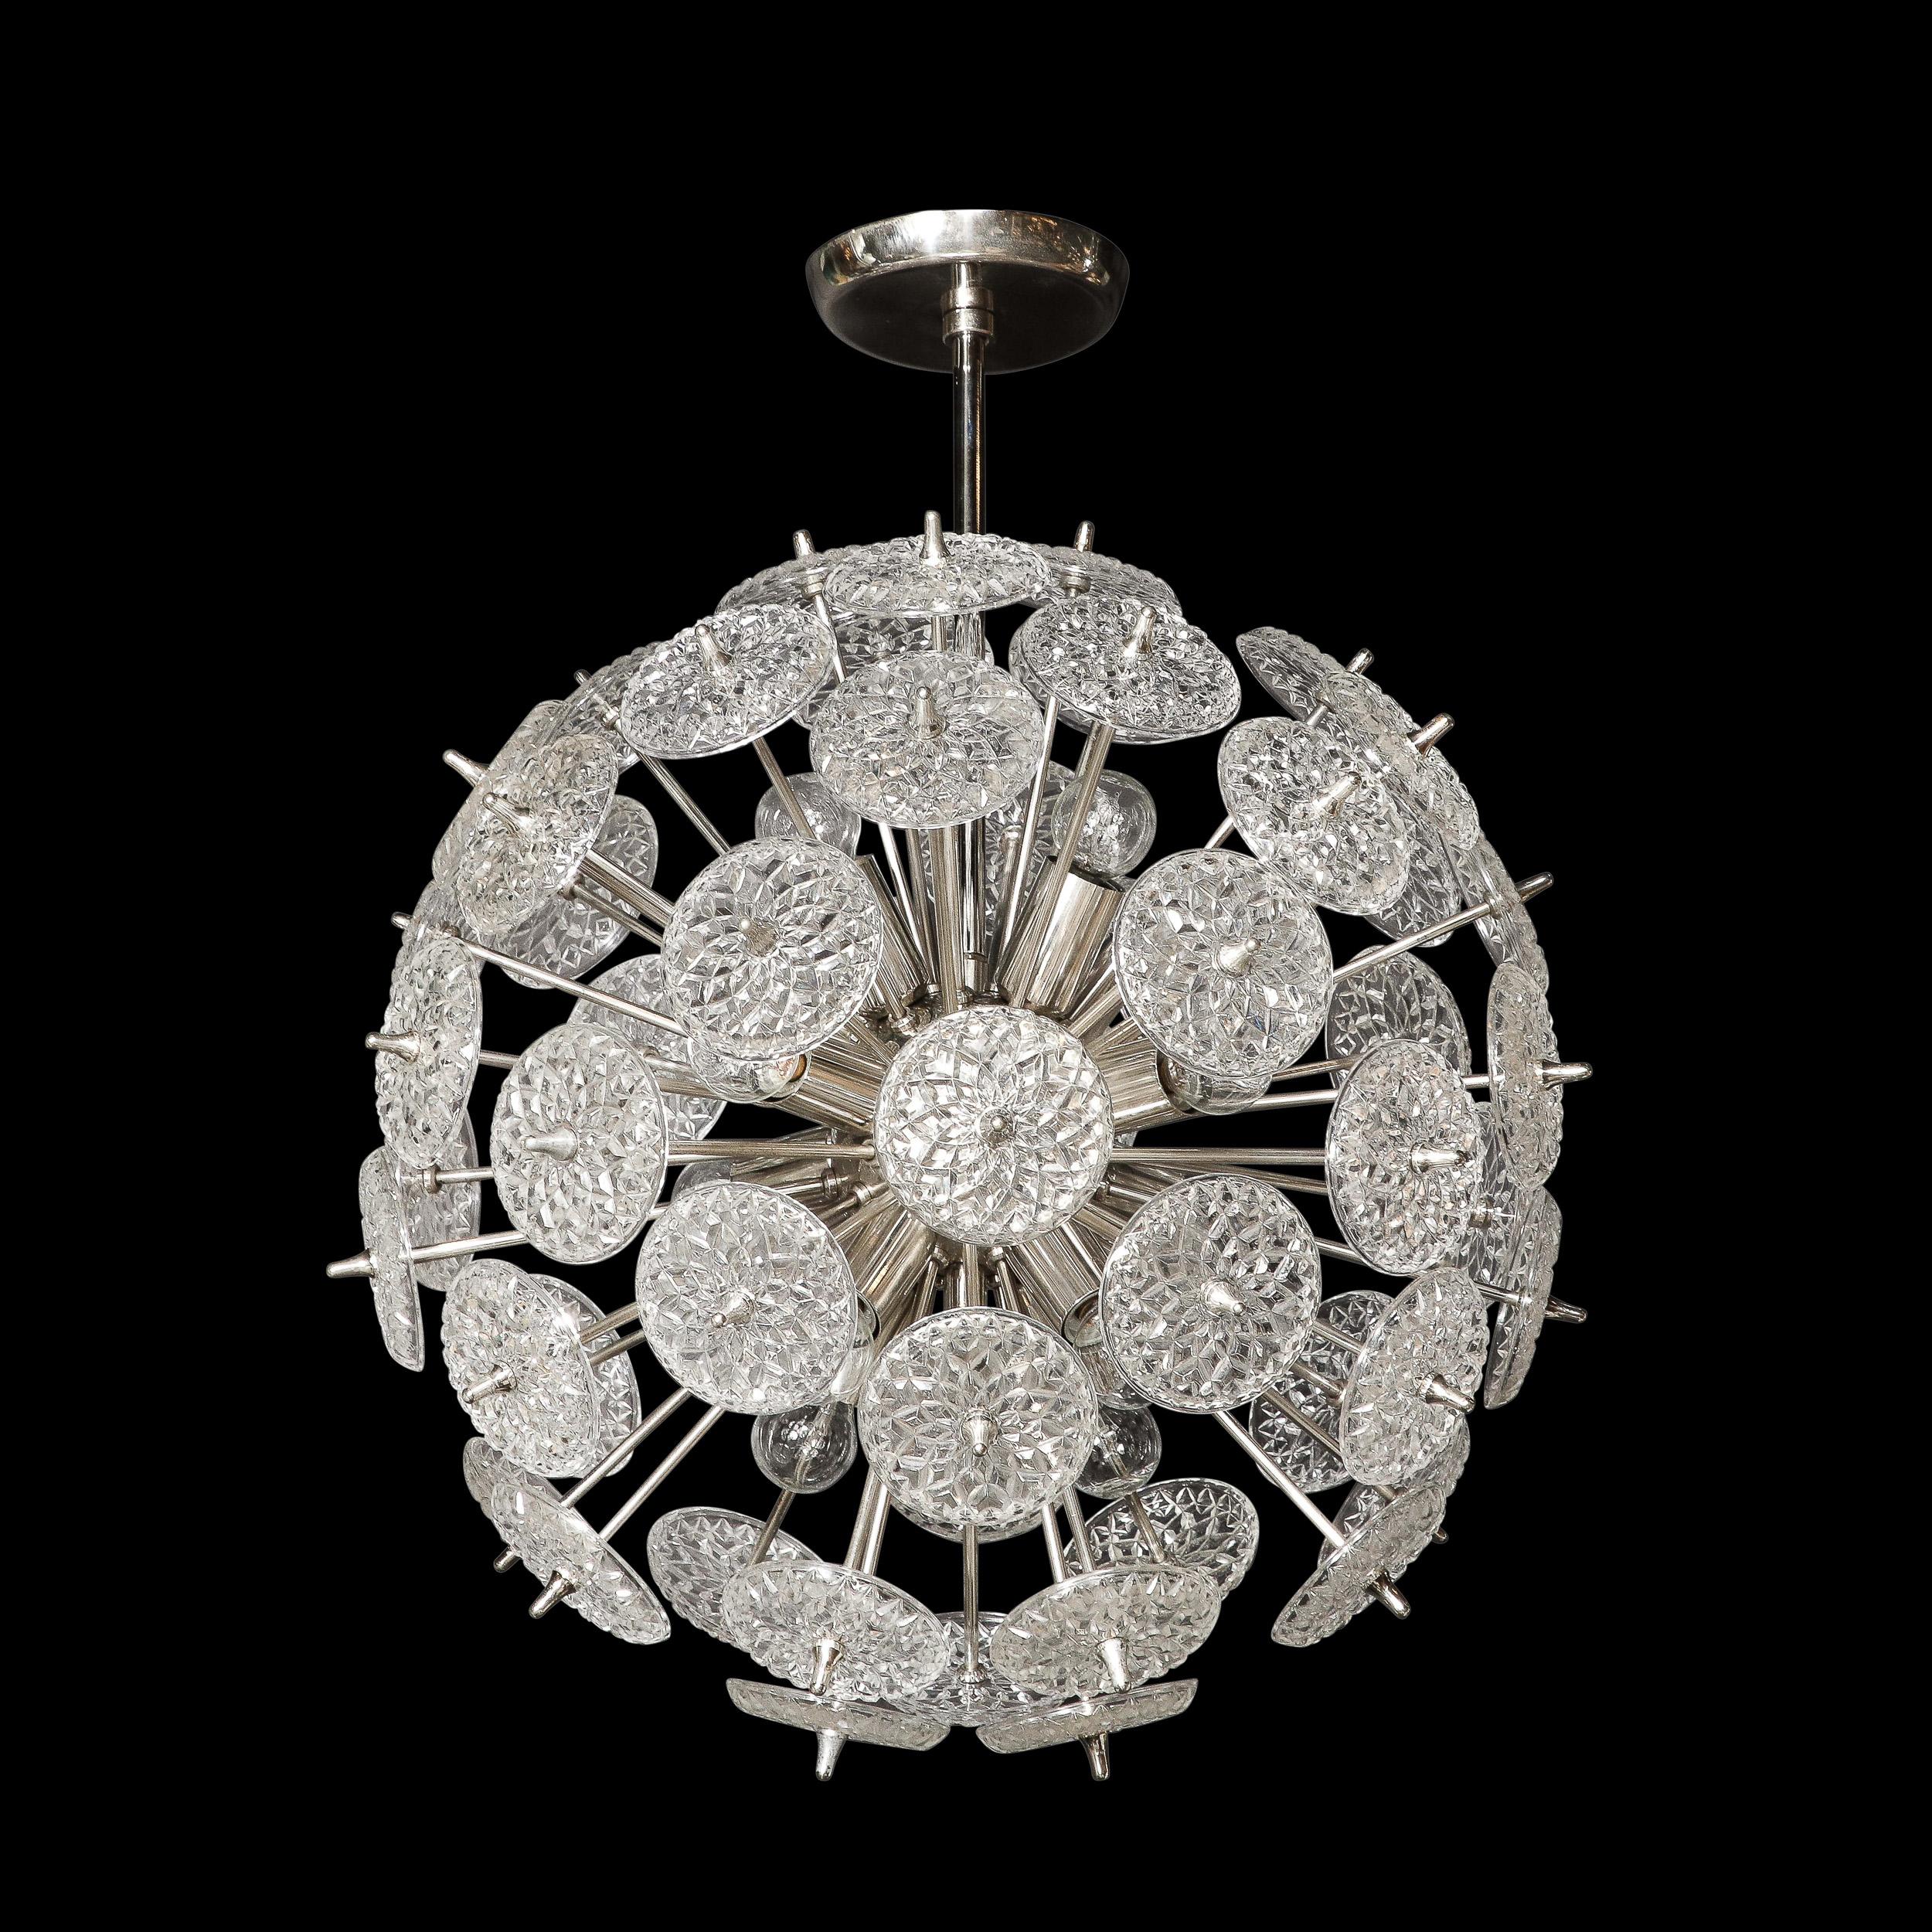 This gleaming and elegant Mid-Century Modernist Pressed Disk Sputnik Chandelier with Nickel Fittings originates from Austria, Circa 1960. Features an expansive sputnik frame rendered in satin nickel with translucent pressed glass disk elements with